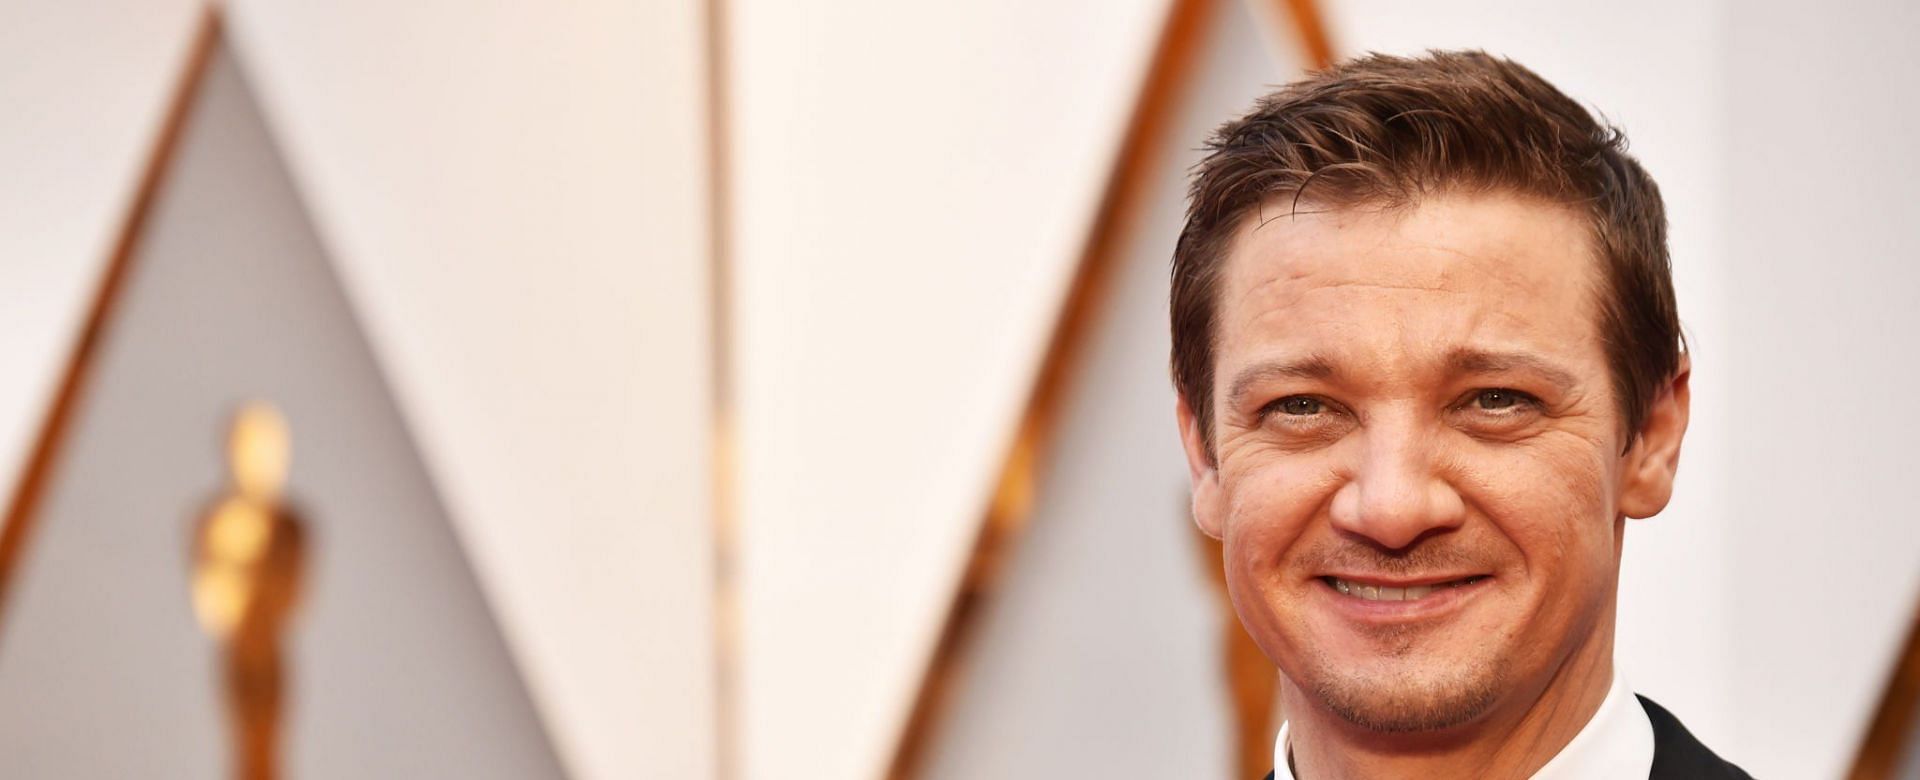 Jeremy Renner has continued to receive love and support in the wake of his snowplow incident (Image via Getty Images)